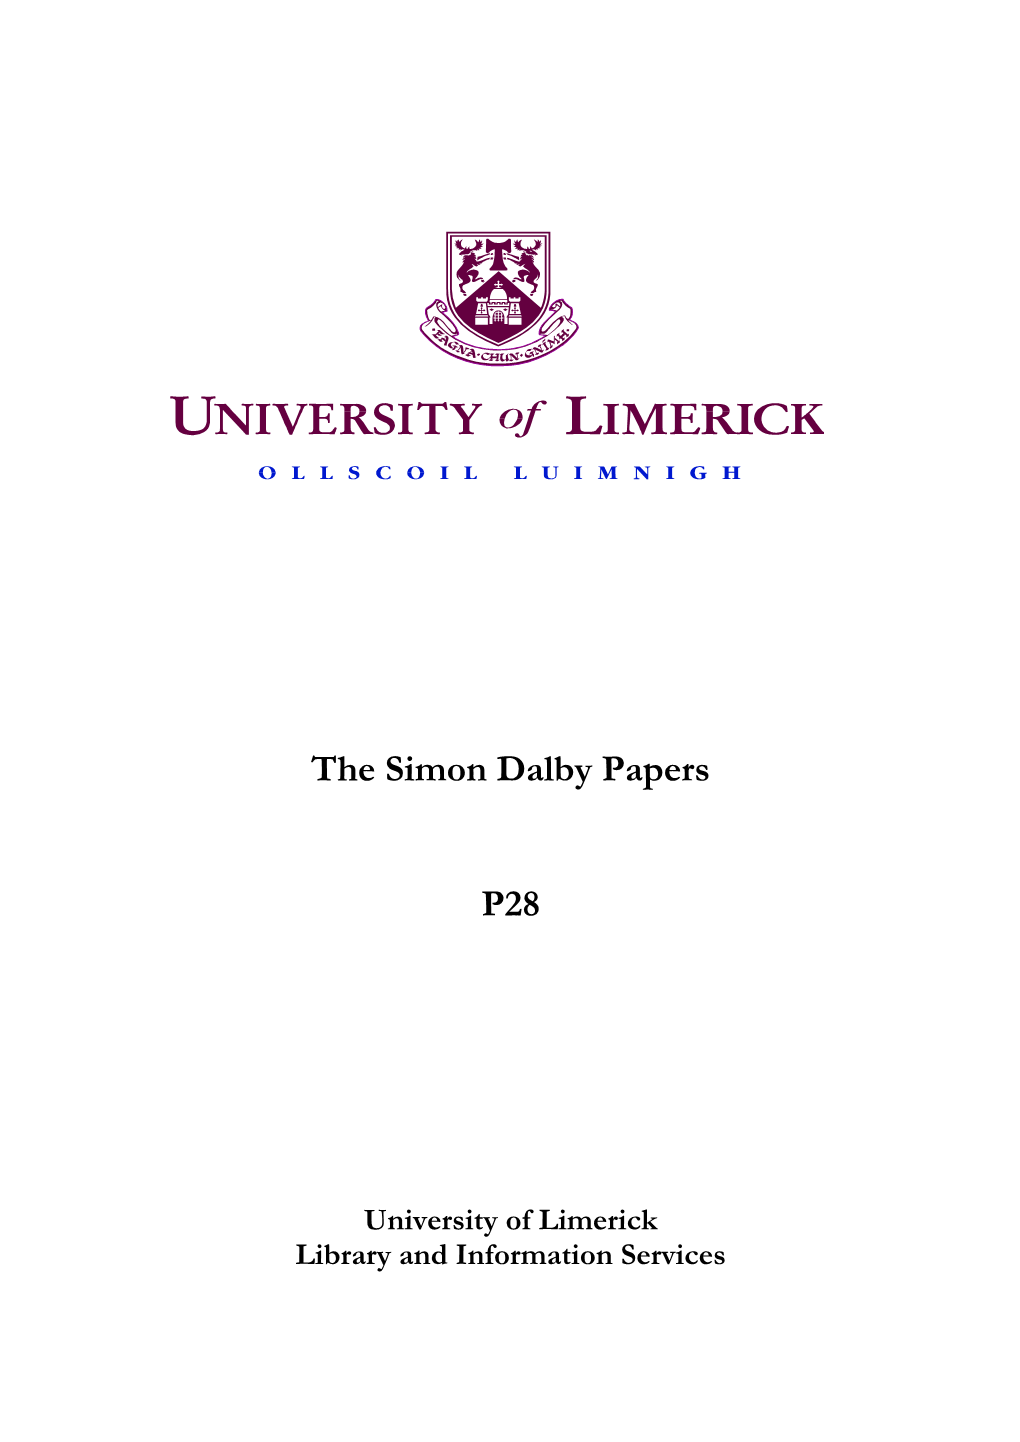 The Simon Dalby Papers